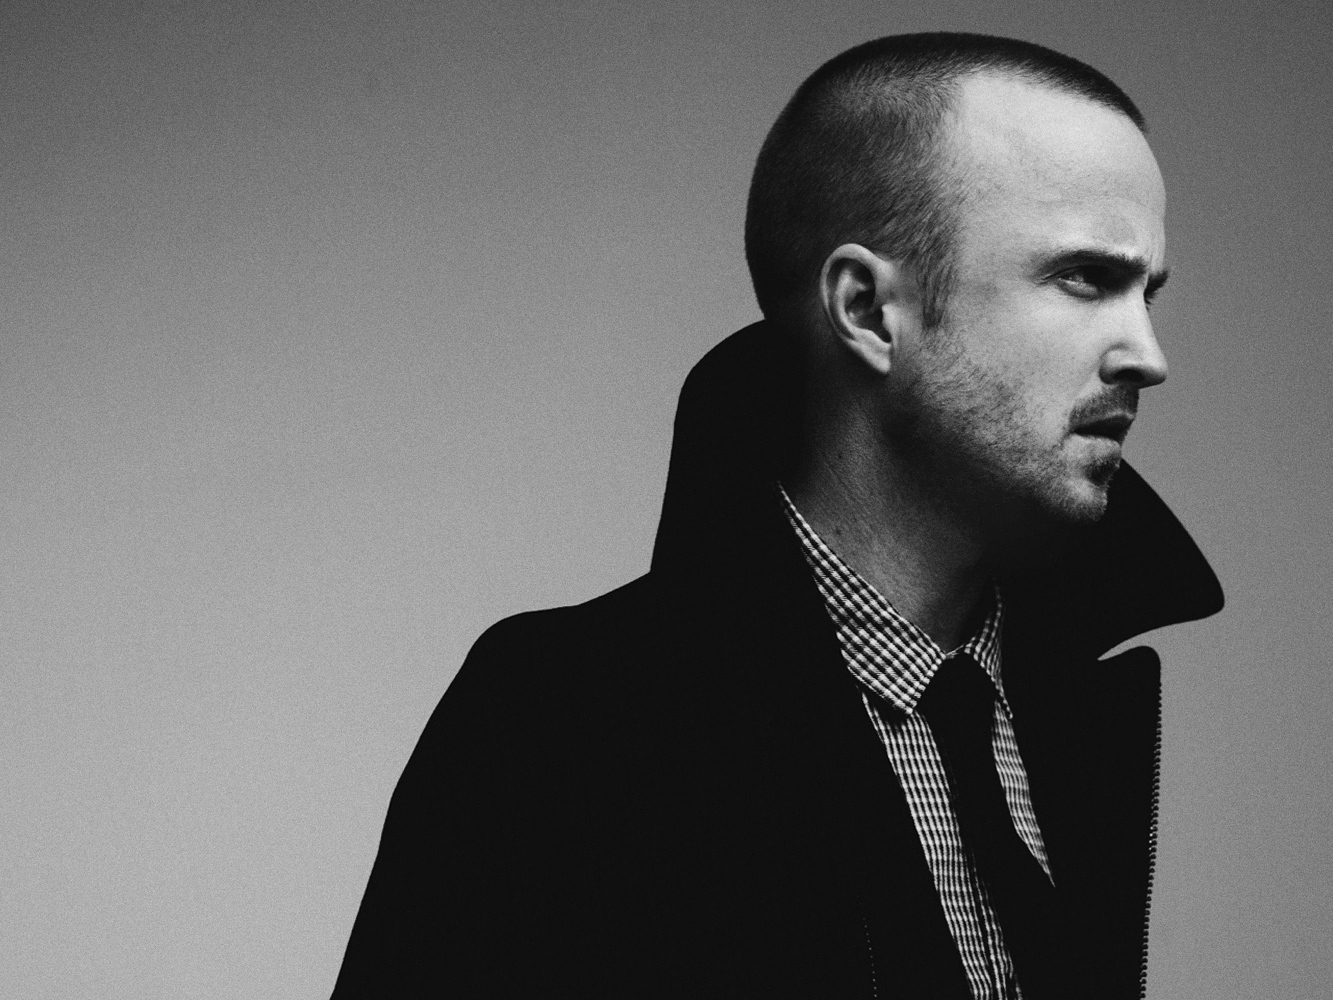 Aaron Paul might star in Stephen King’s ‘The Dark Tower’